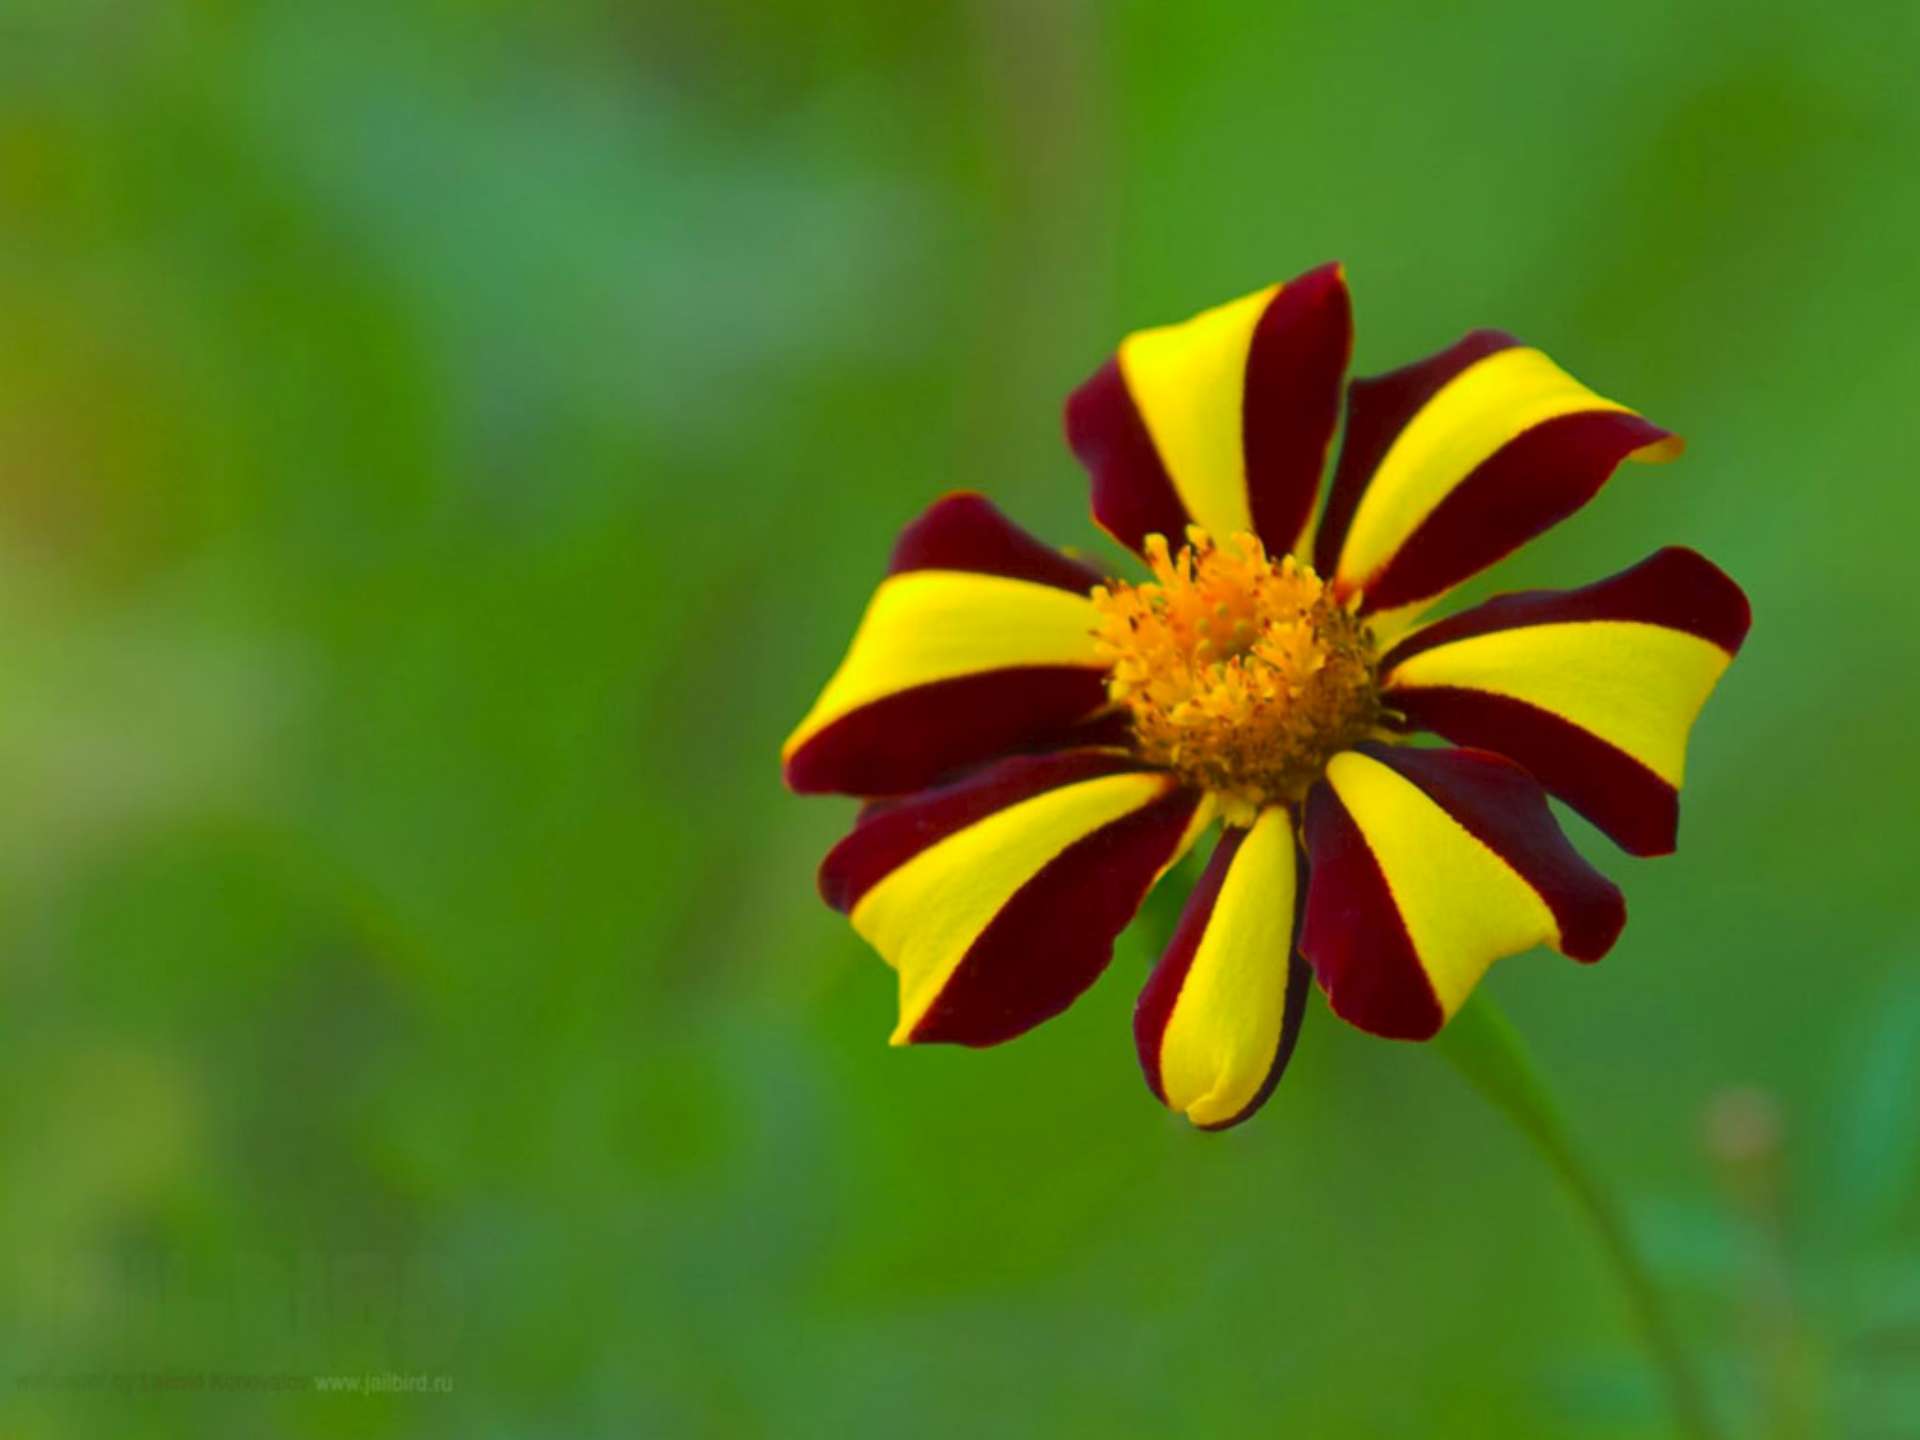 Yellow and Red Flower HD Wallpaper